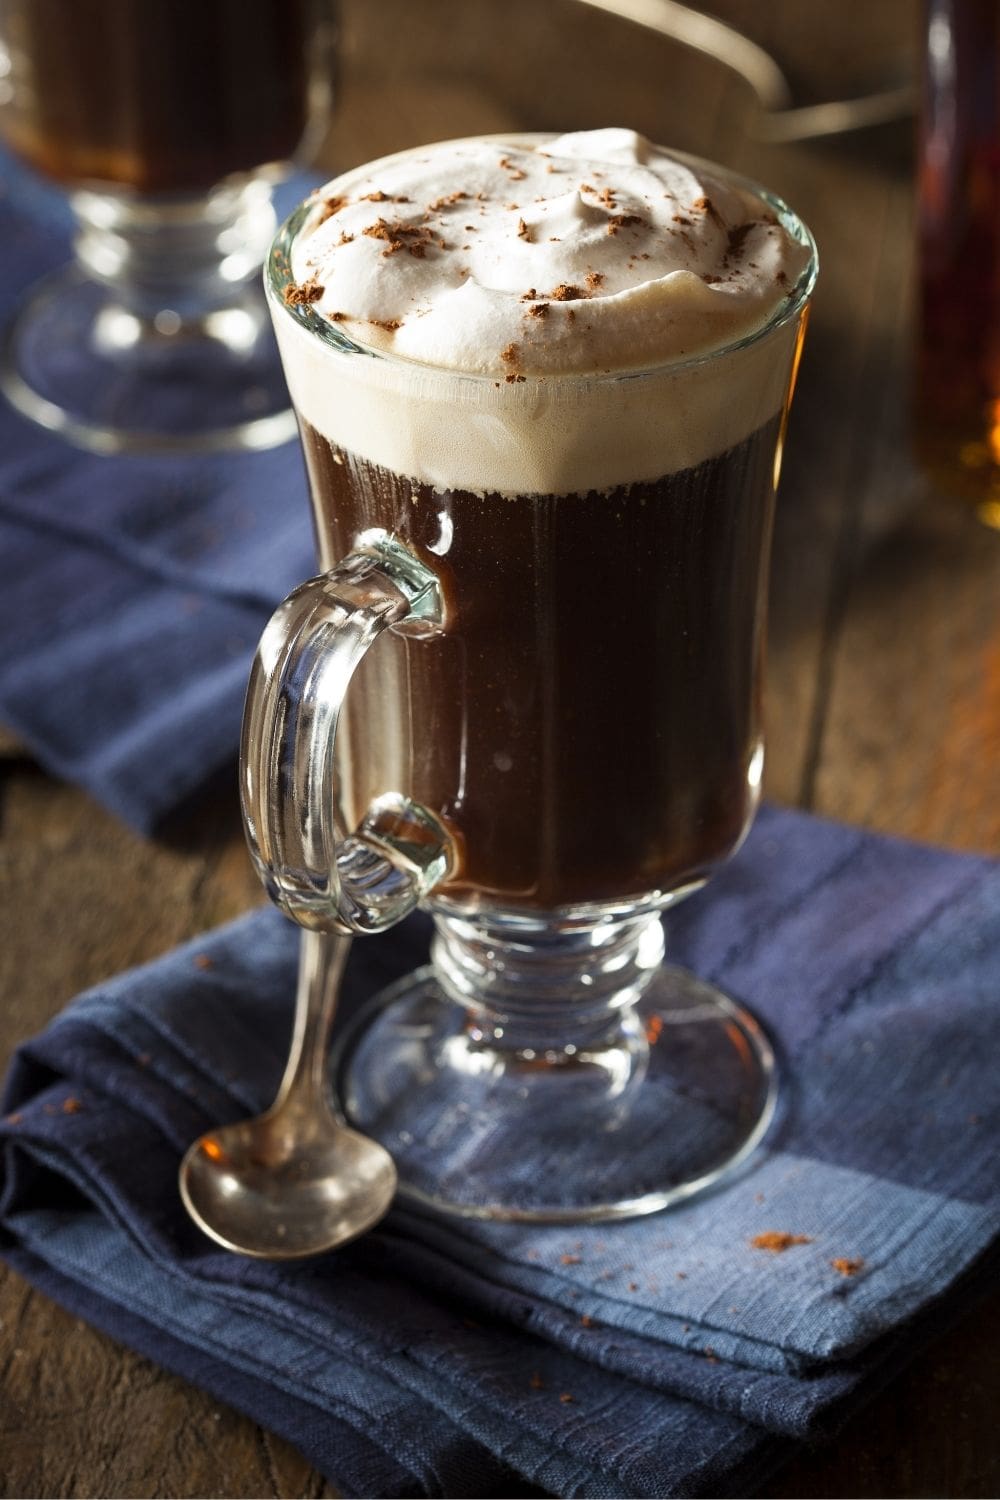 Cozy and Warming Irish Coffee with Foam and a Dusting of Cocoa Powder on Top